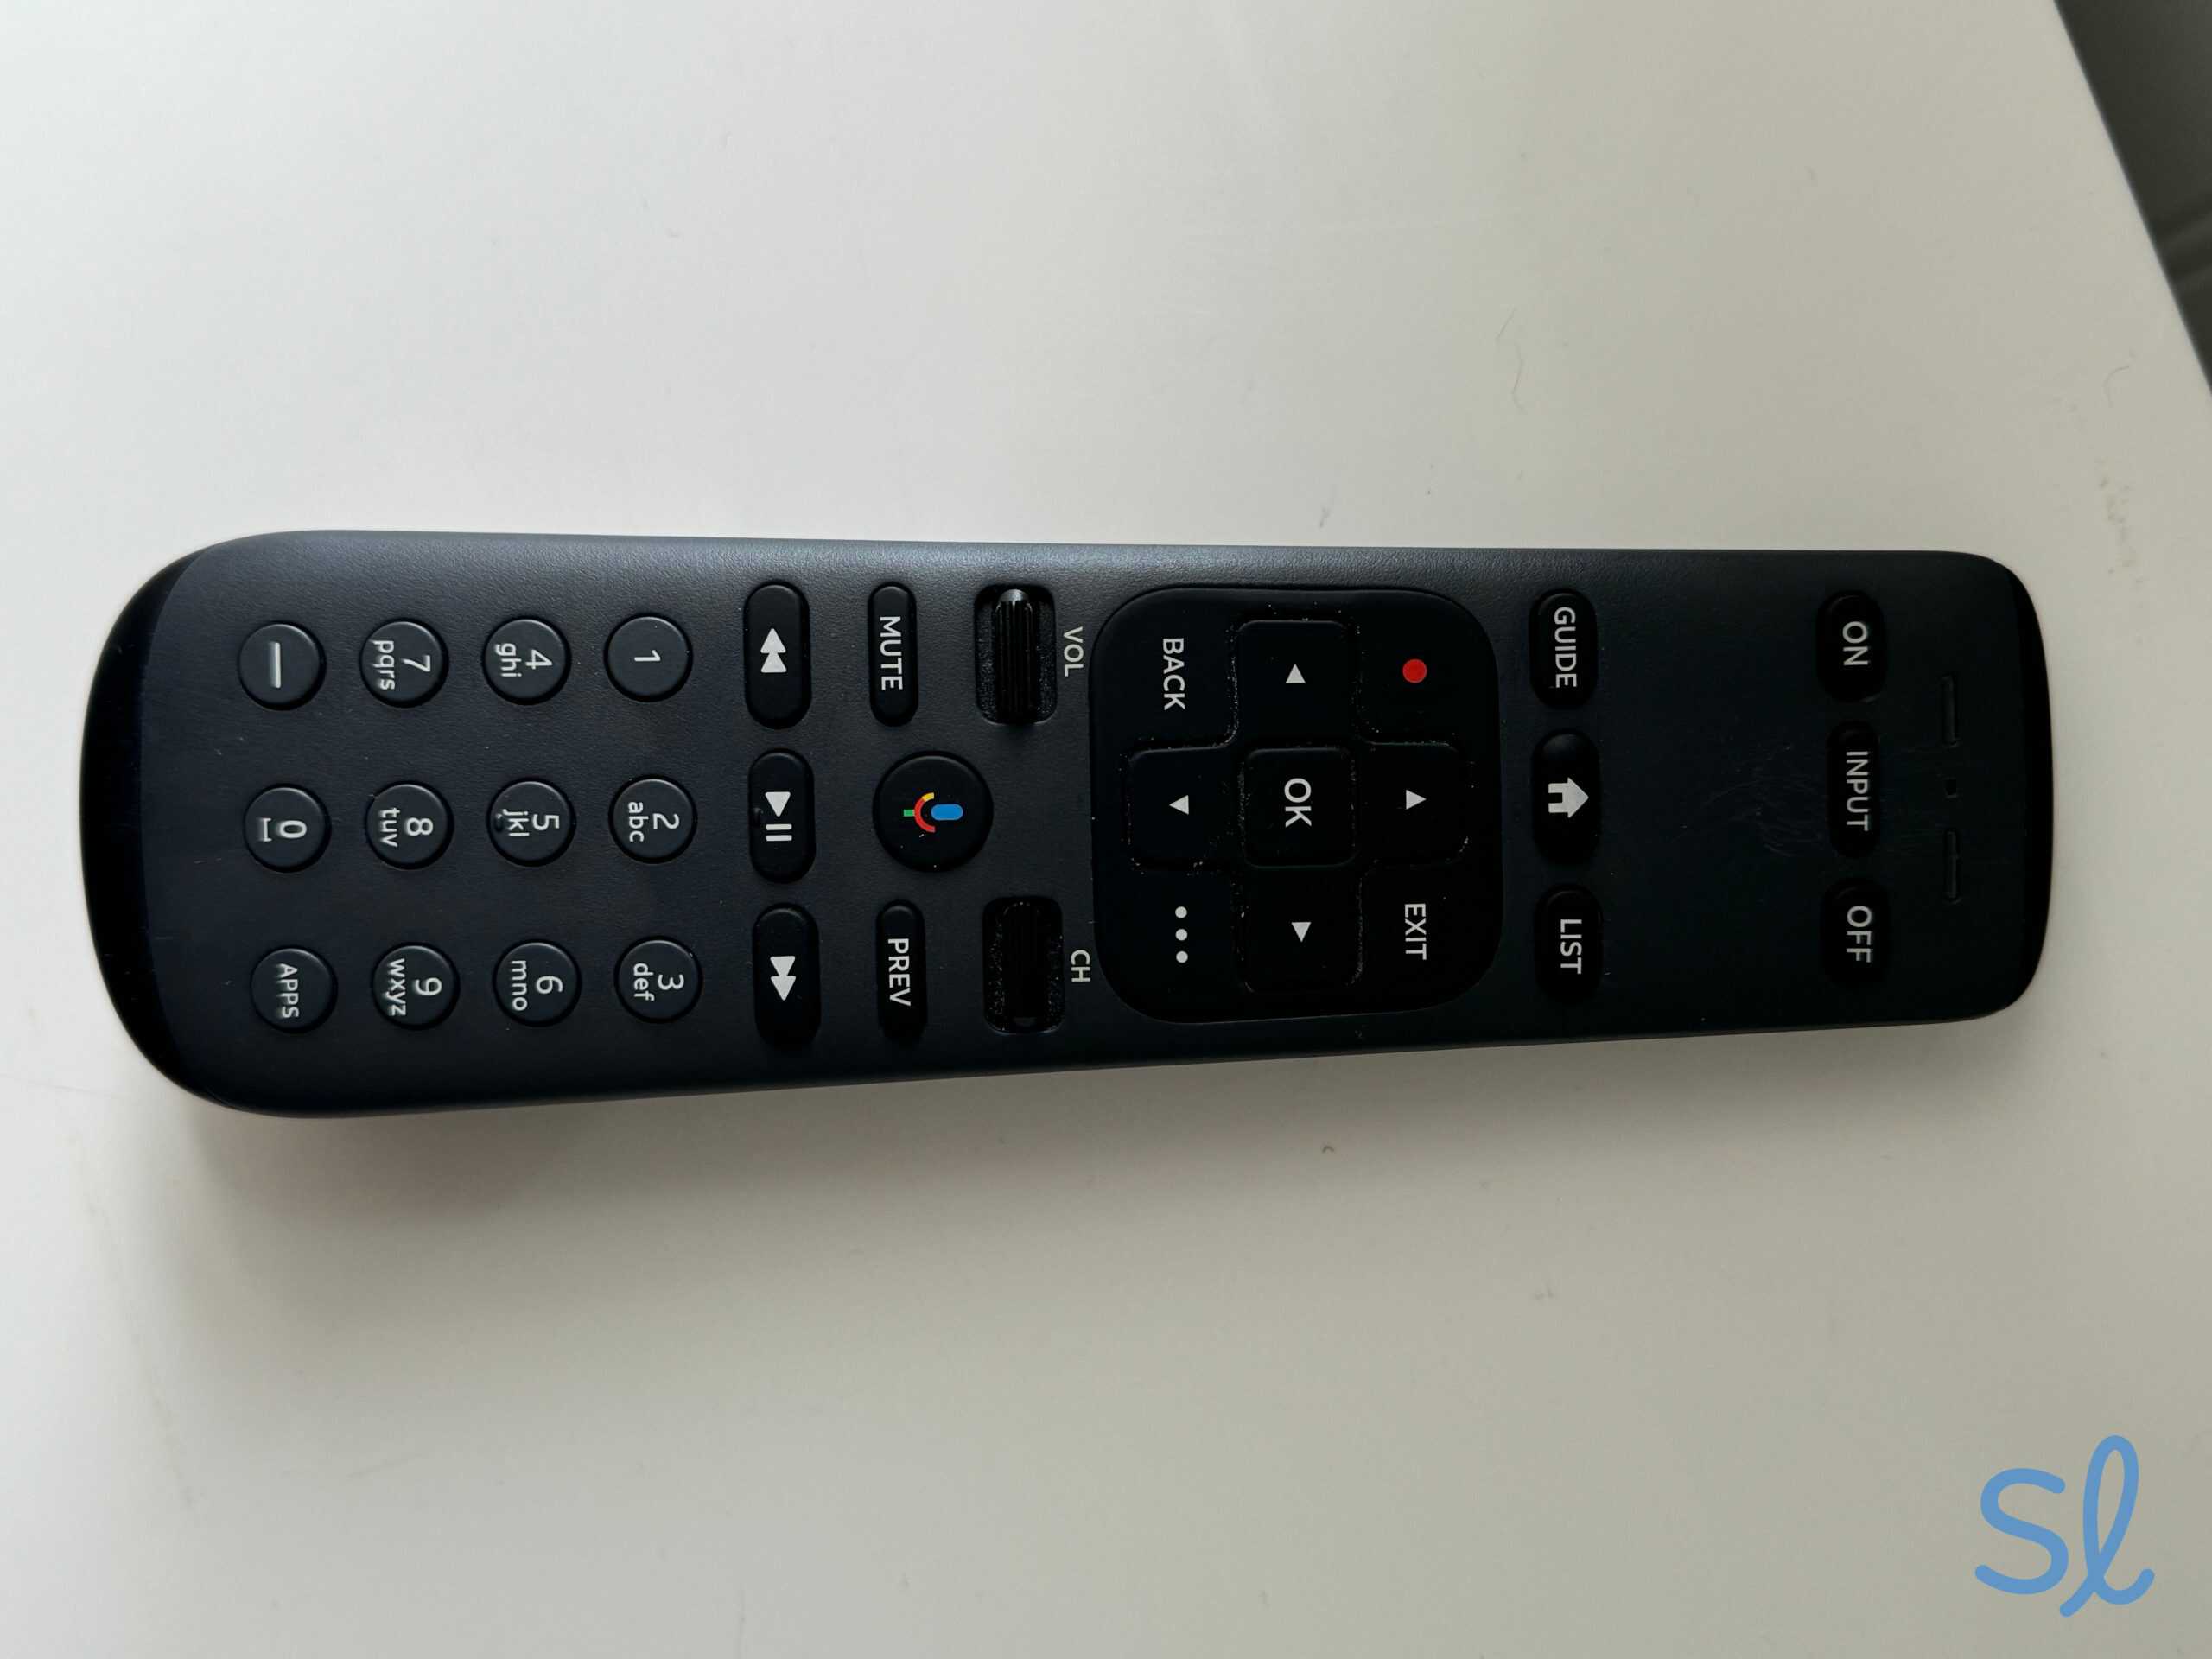 DIRECTV's remote is easy to use and includes a voice control feature, as seen on our tester's remote